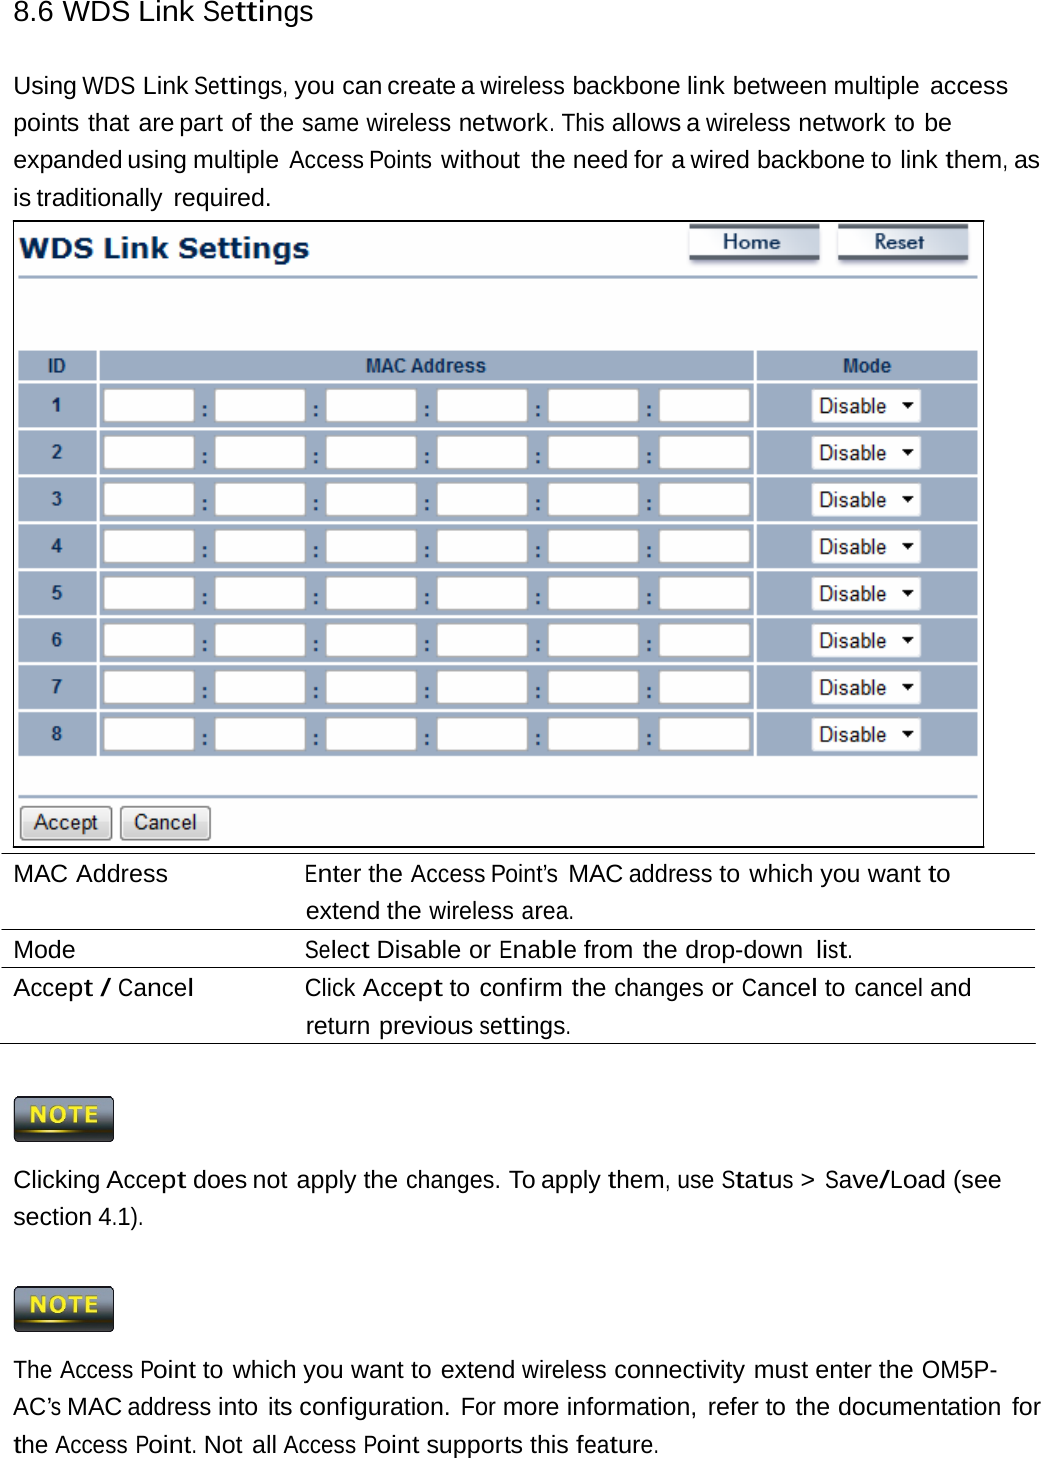 8.6 WDS Link Settings Using WDS Link Settings, you can create a wireless backbone link between multiple  access points that are part of the same wireless network. This allows a wireless network to be expanded using multiple Access Points without the need for a wired backbone to link them, as is traditionally  required. MAC Address  Enter the Access Point’s MAC address to which you want to extend the wireless area. Mode  Select Disable or Enable from the drop-down list. Accept / Cancel Click Accept to confirm the changes or Cancel to cancel and return previous settings.  Clicking Accept does not apply the changes. To apply them, use Status &gt; Save/Load (see section 4.1).  The Access Point to which you want to extend wireless connectivity must enter the OM5P-AC’s MAC address into its configuration. For more information, refer to the documentation for the Access Point. Not all Access Point supports this feature. 